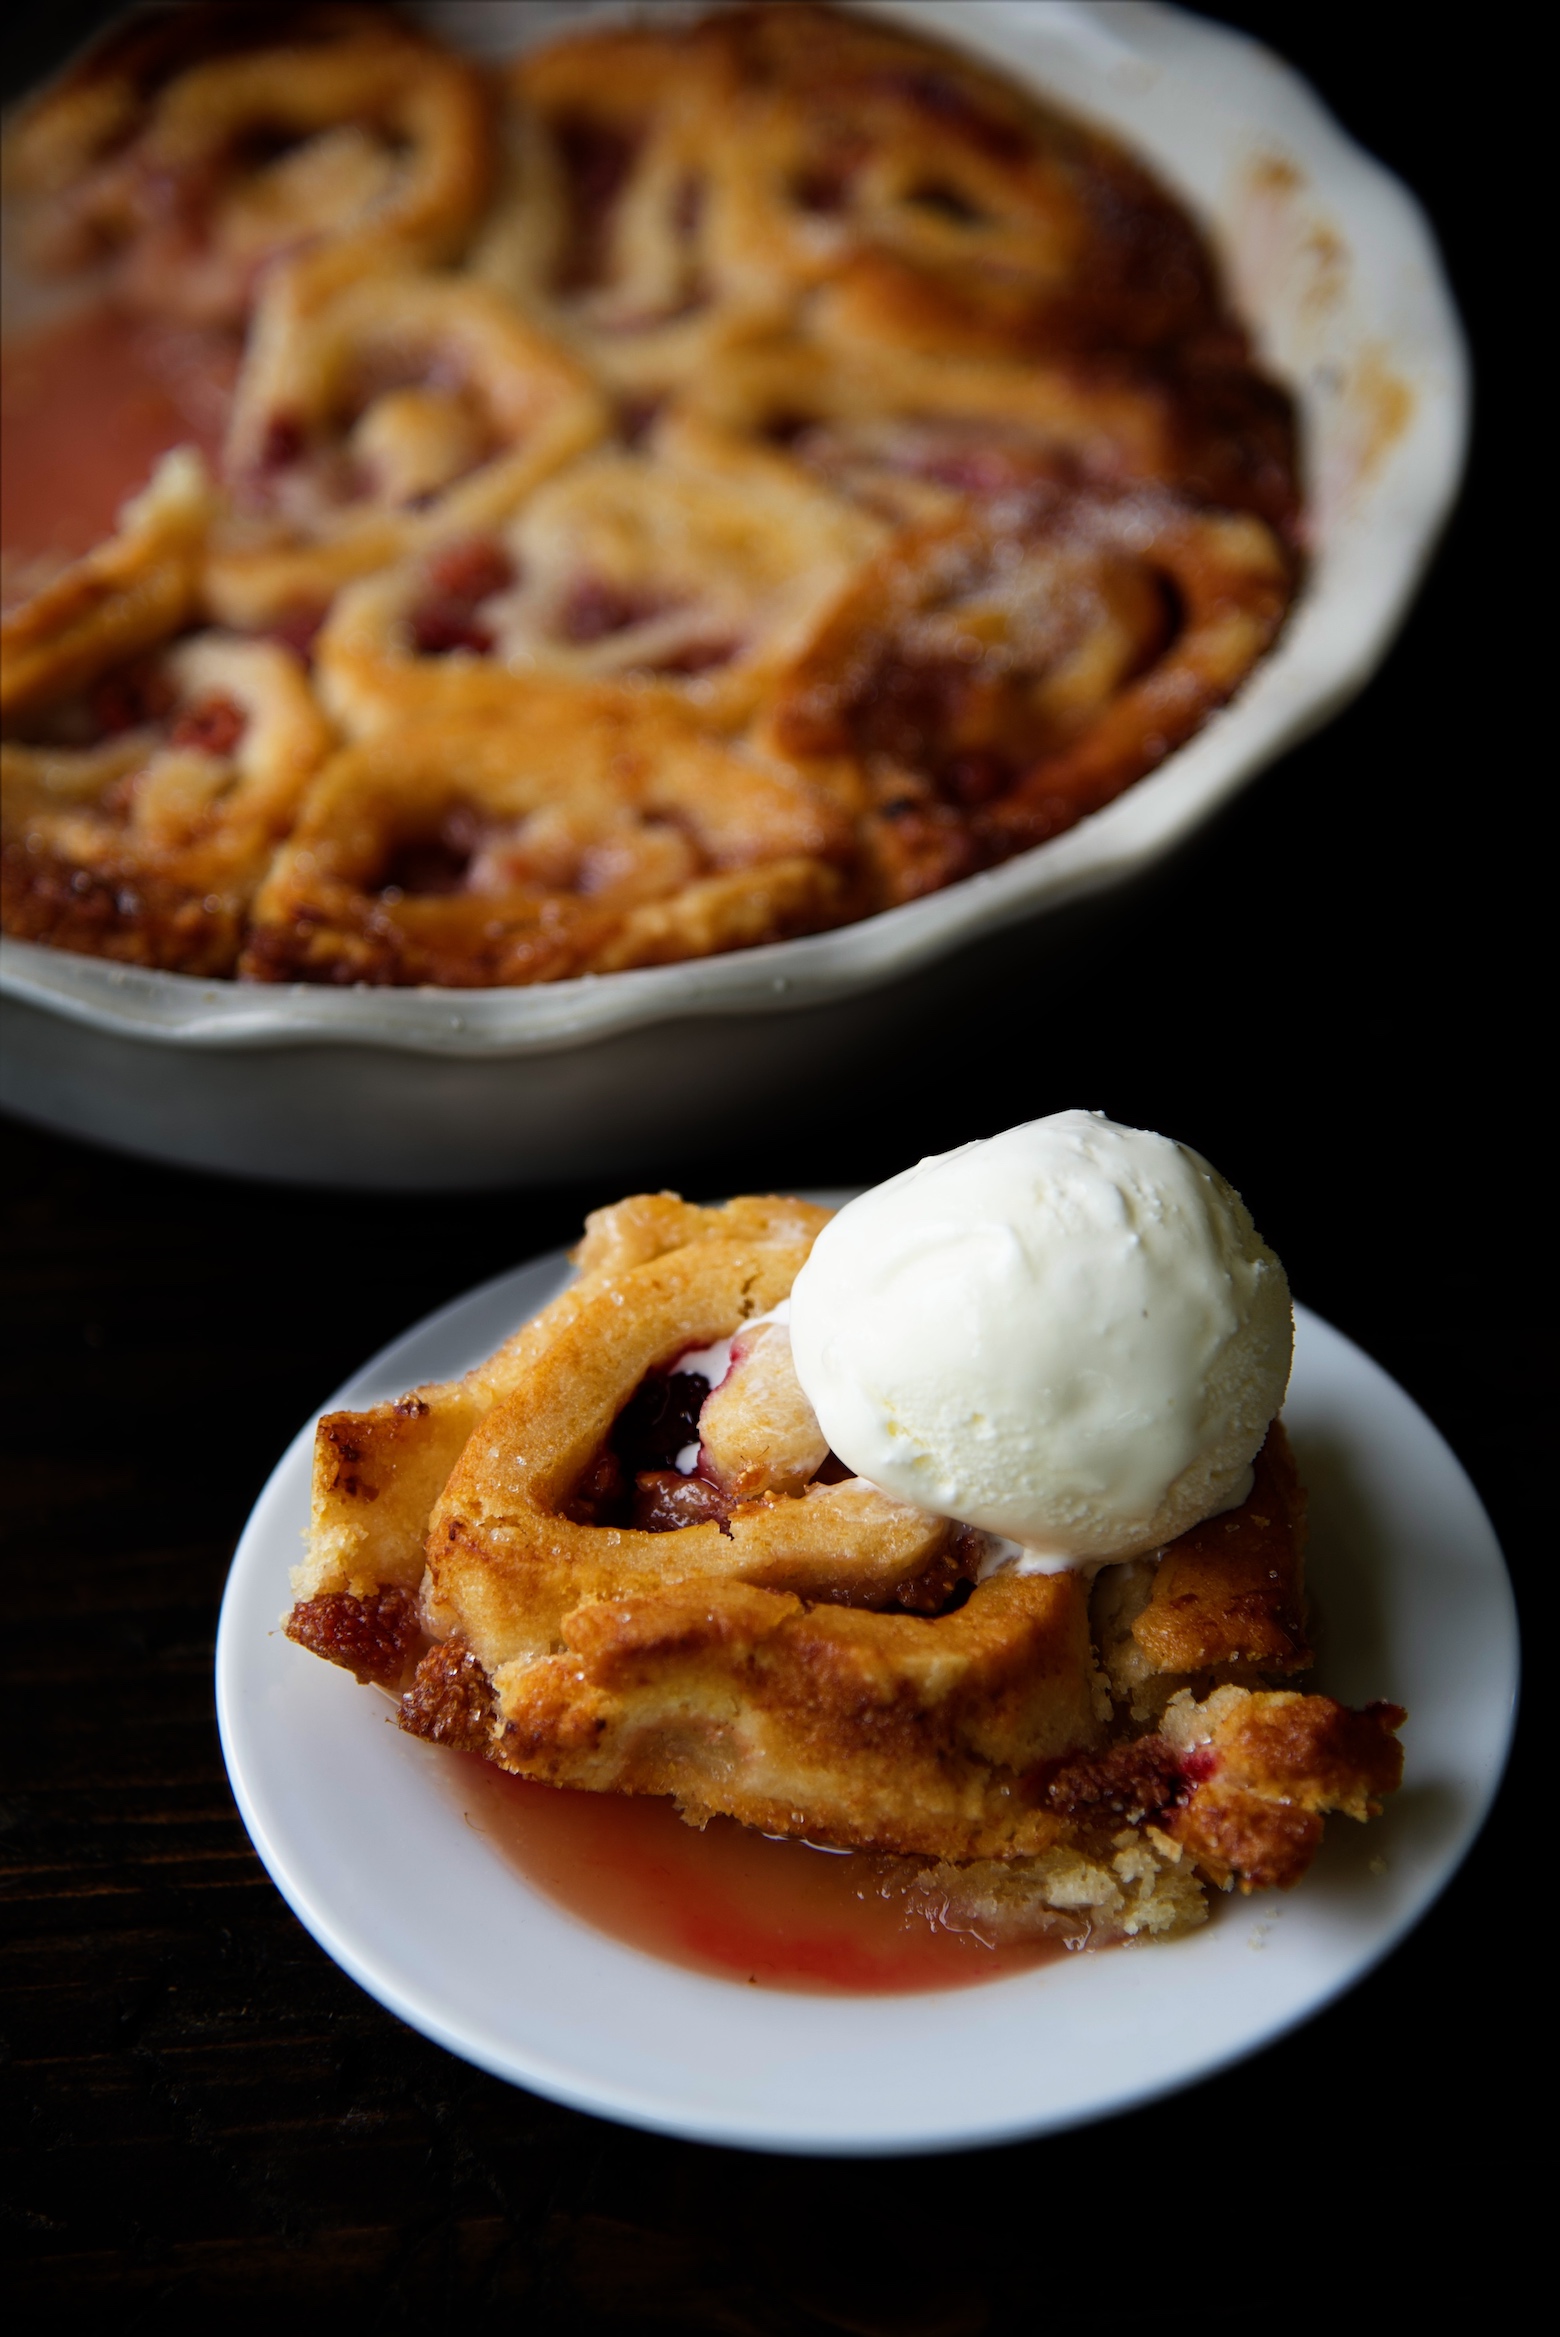 Cobbler piece on a plate with a scoop of ice cream with remaining cobbler in background.